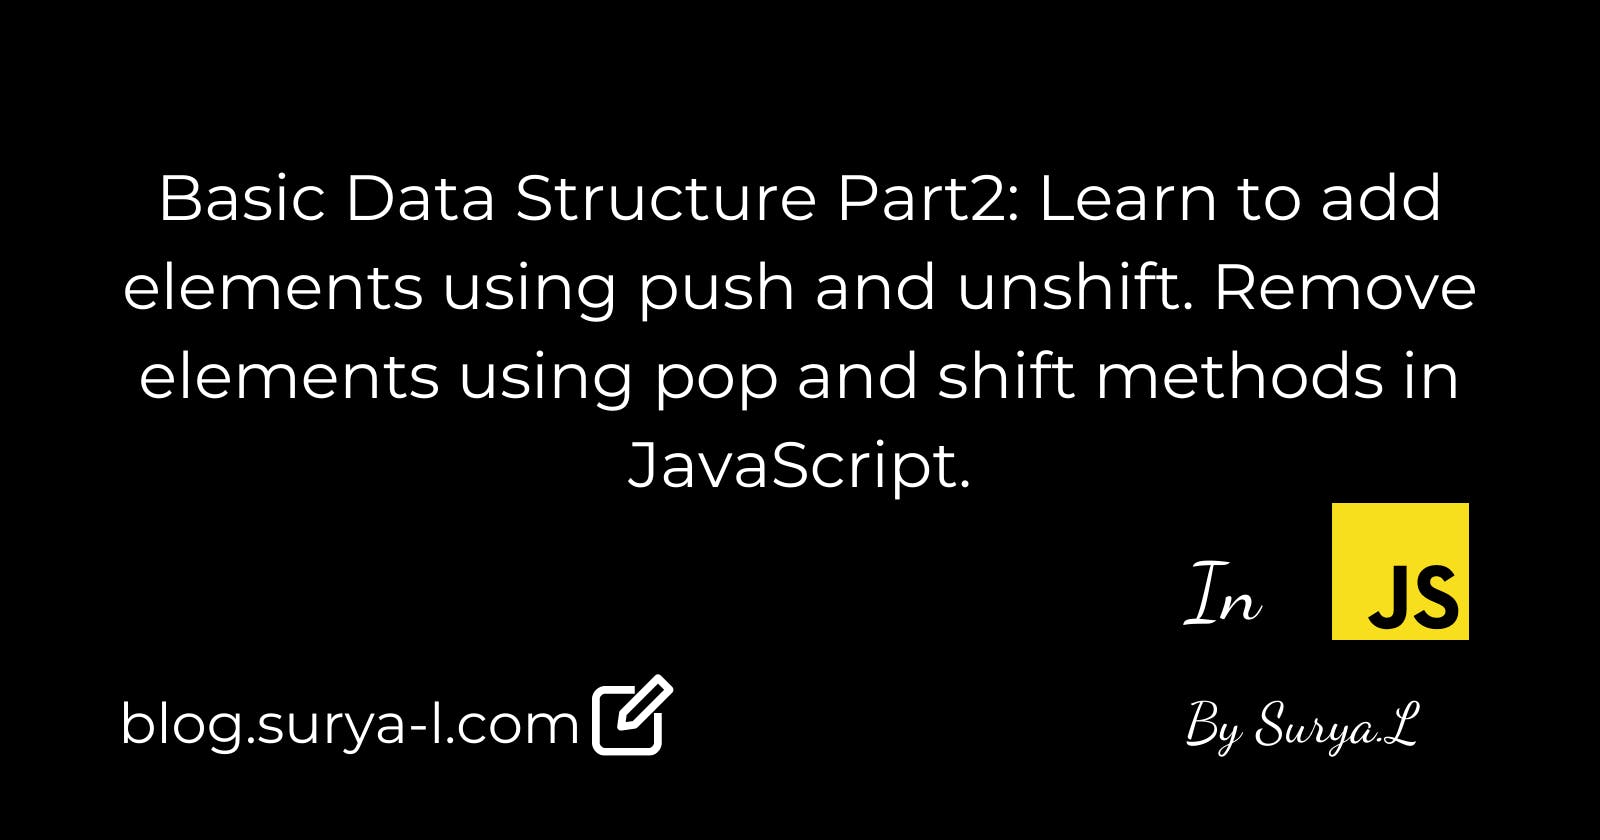 Basic Data Structure Part2: Learn to add an elements using push ( ) and unshift( ) . Remove elements using pop and shift methods in JavaScript.